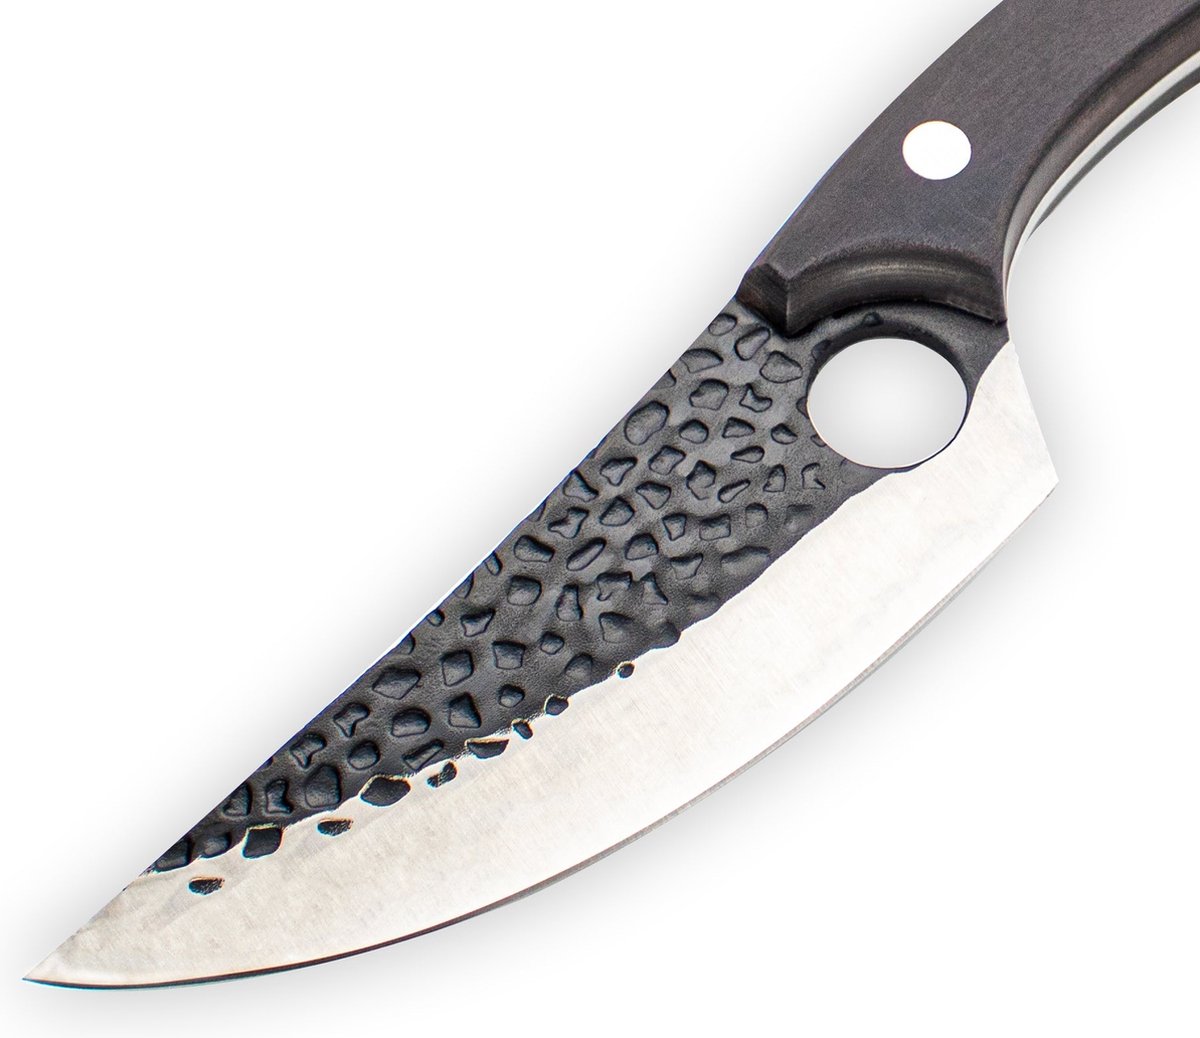 Hammered Stainless Steel Gladiator Series - Universal Cook's  Knife Black